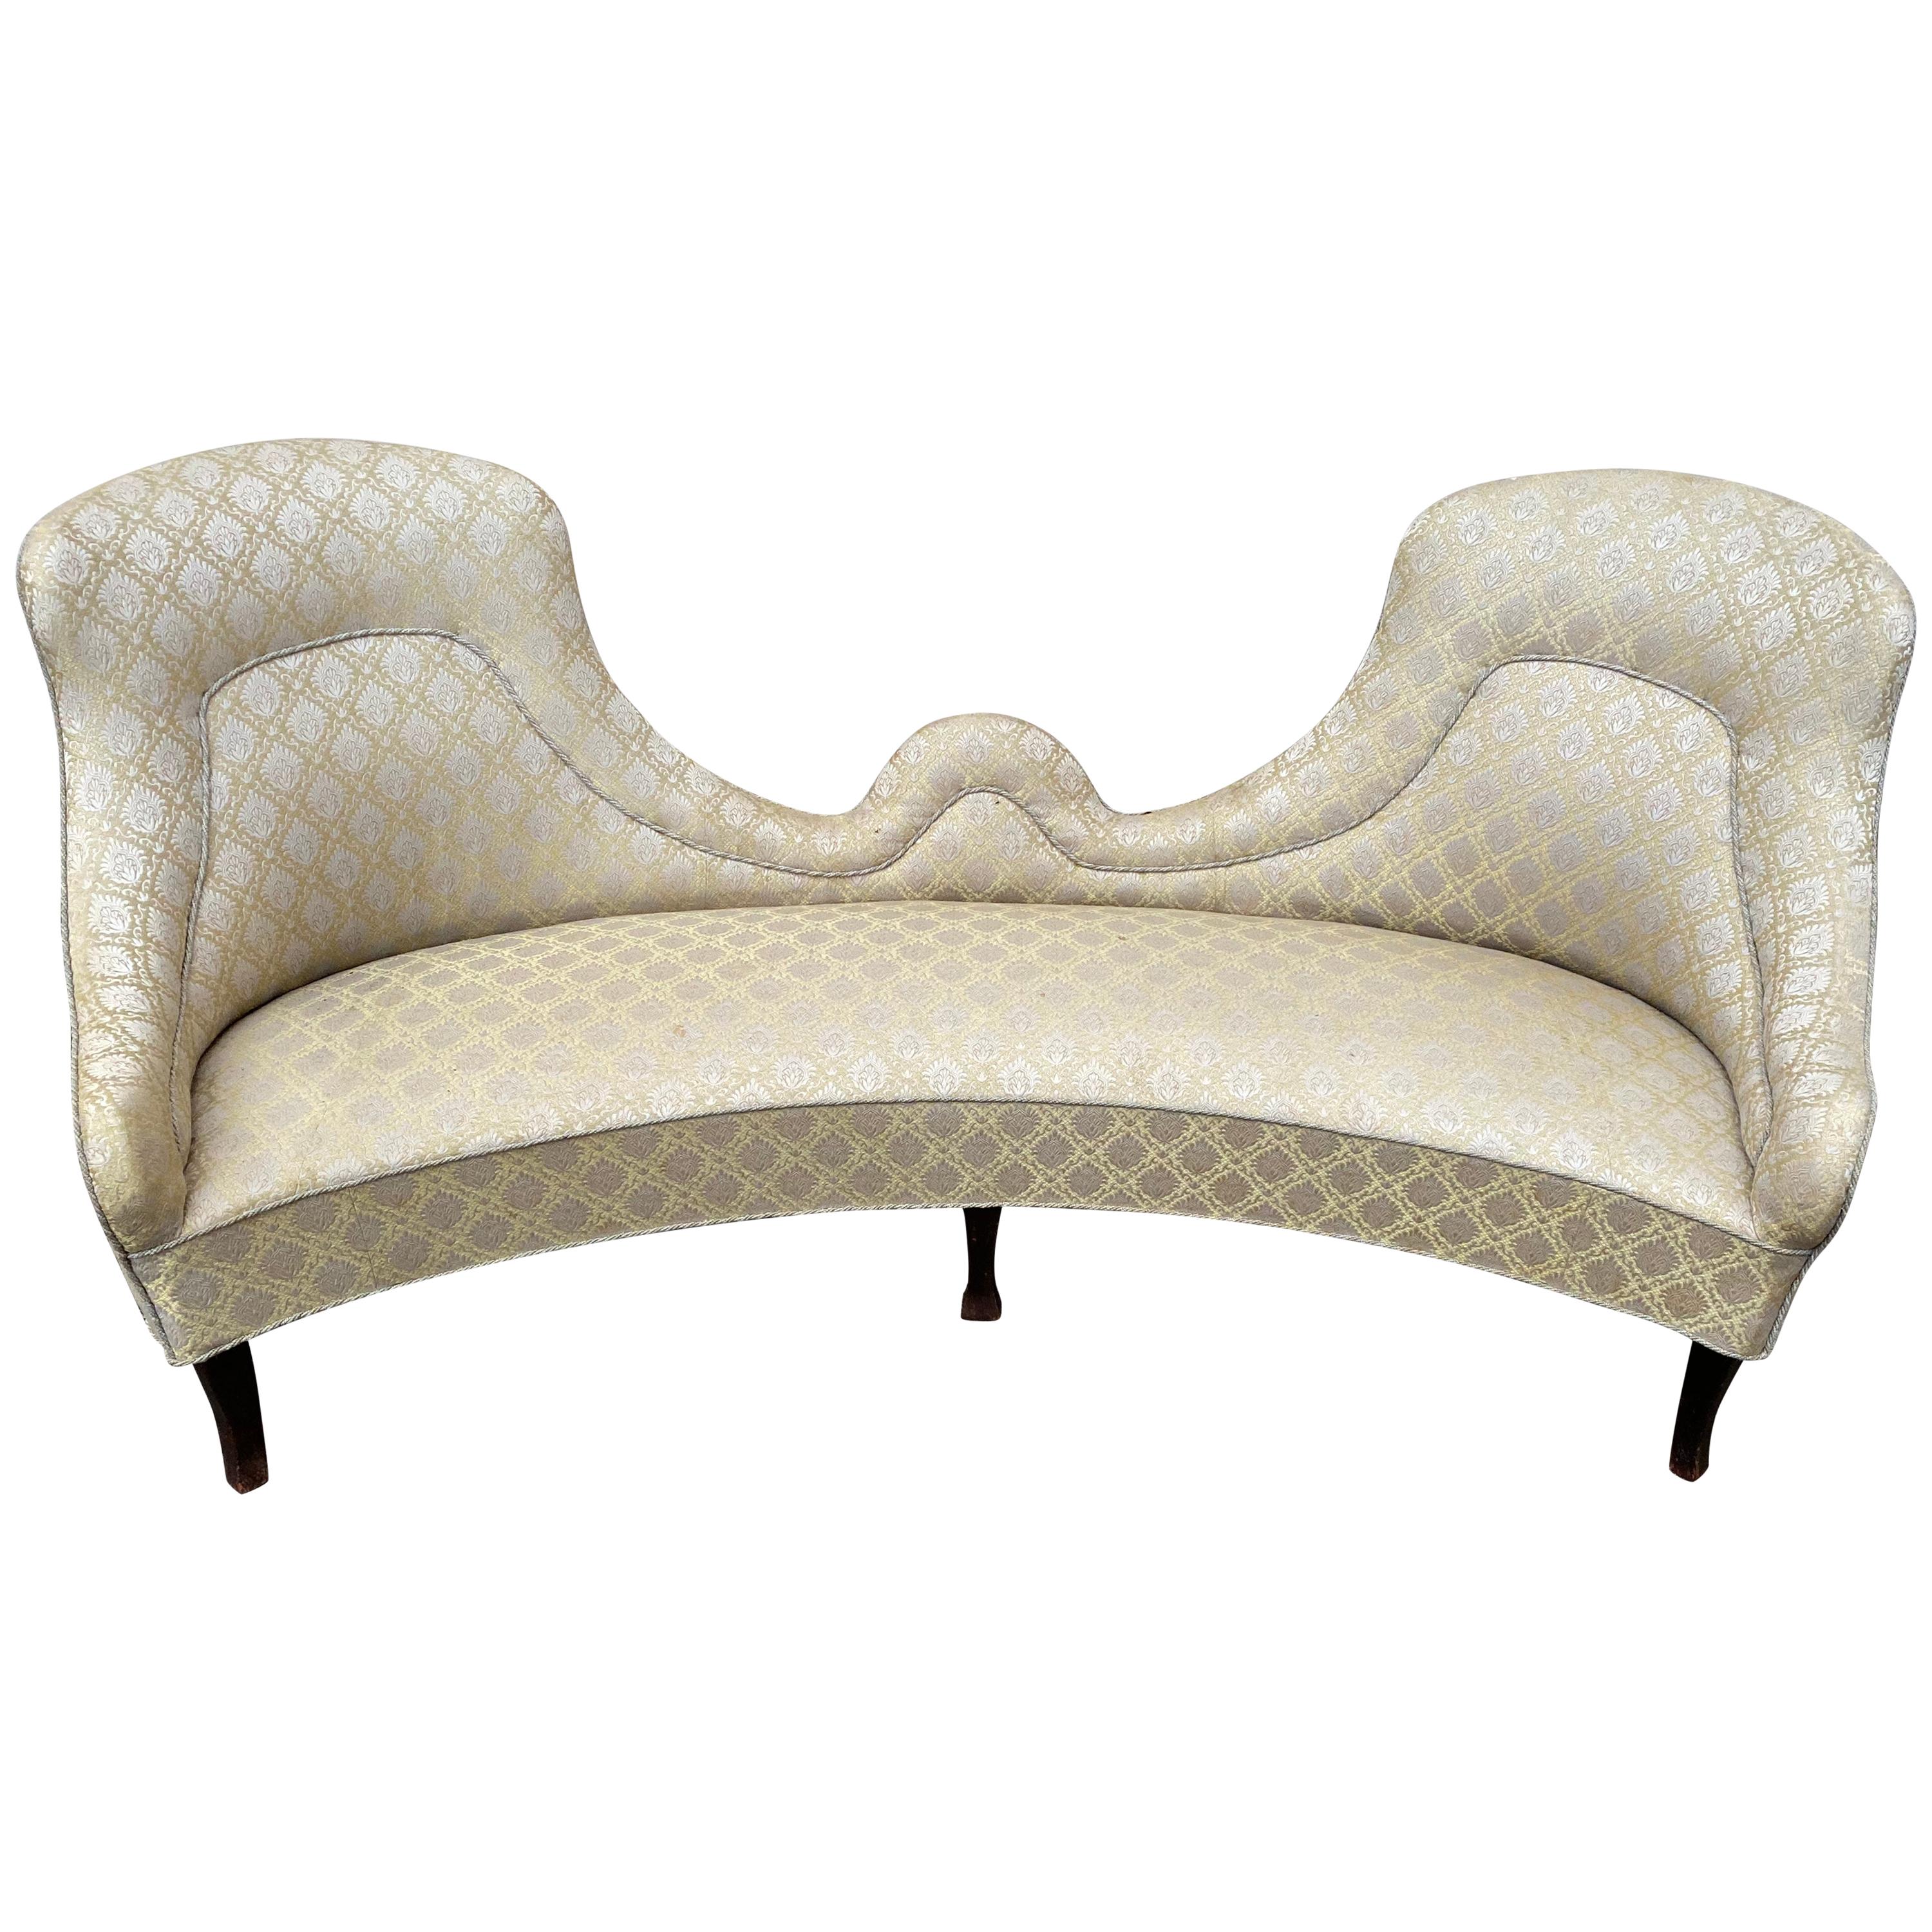 Early 19th Century Horseshoe-Shaped Bowie Sofa, Sweden